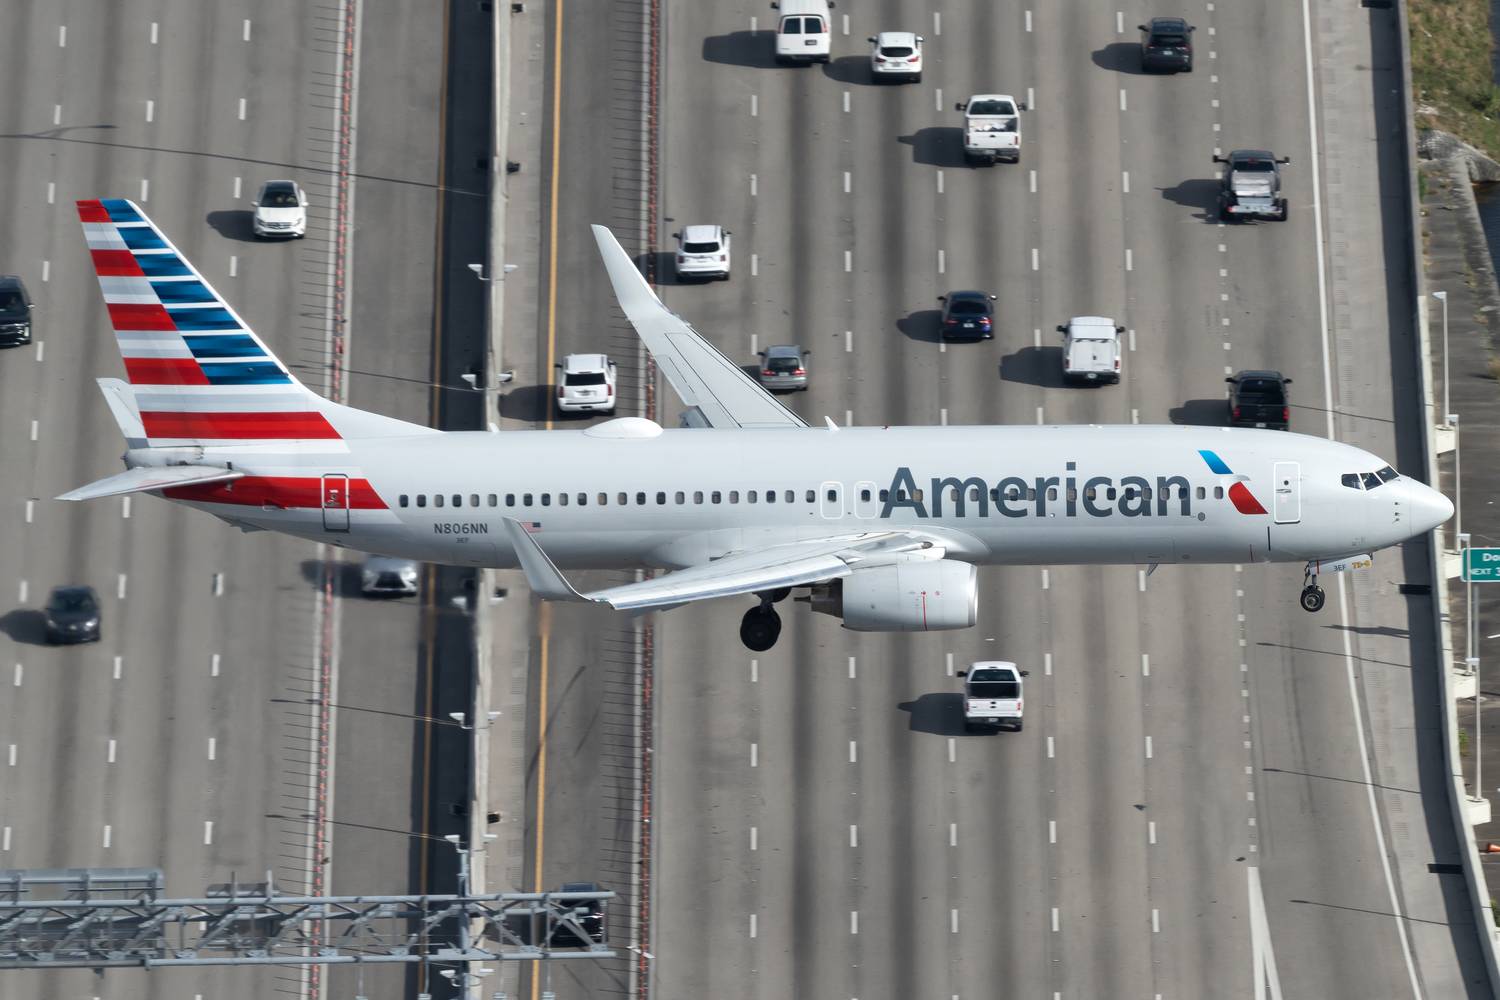 An American Airlines Boeing 737-800 flying just over a highway before landing.